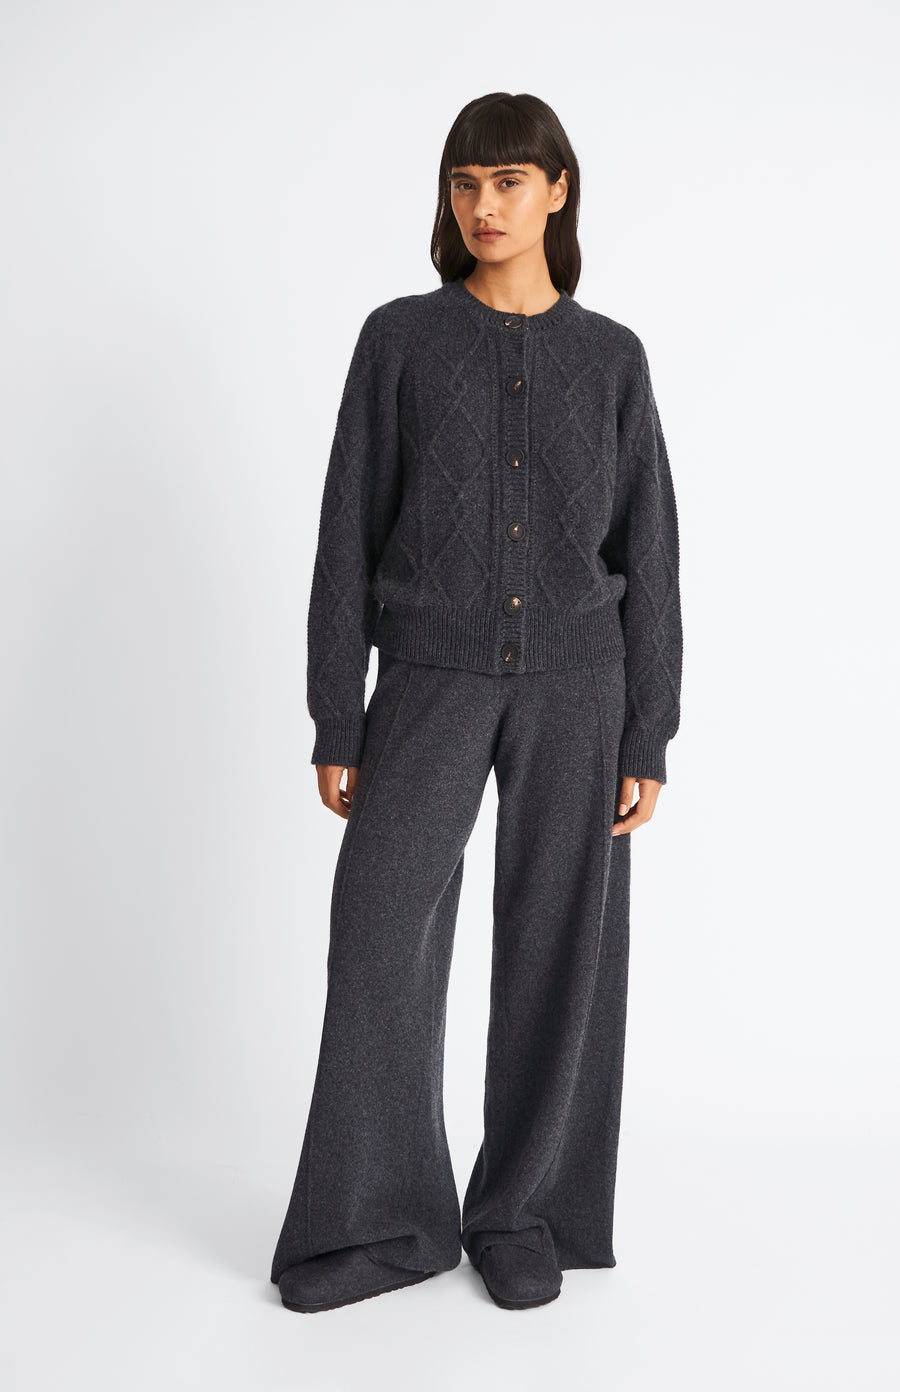 Pringle Multi Texture Cashmere blend cardigan in Charcoal on model with matching trousers